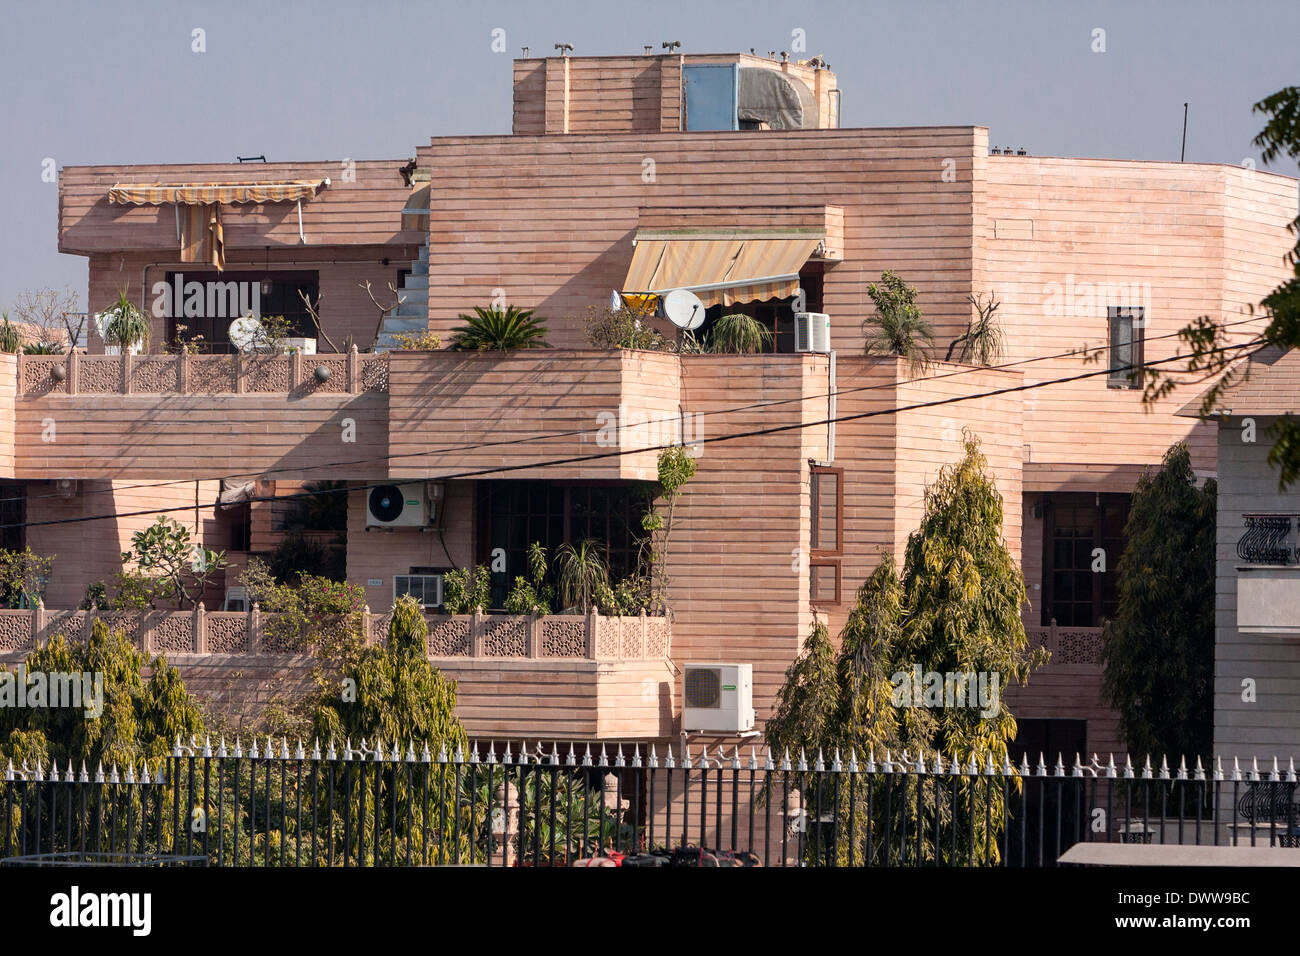 Jaipur, Rajasthan, India. An Upper Middle-class House. Stock Photo